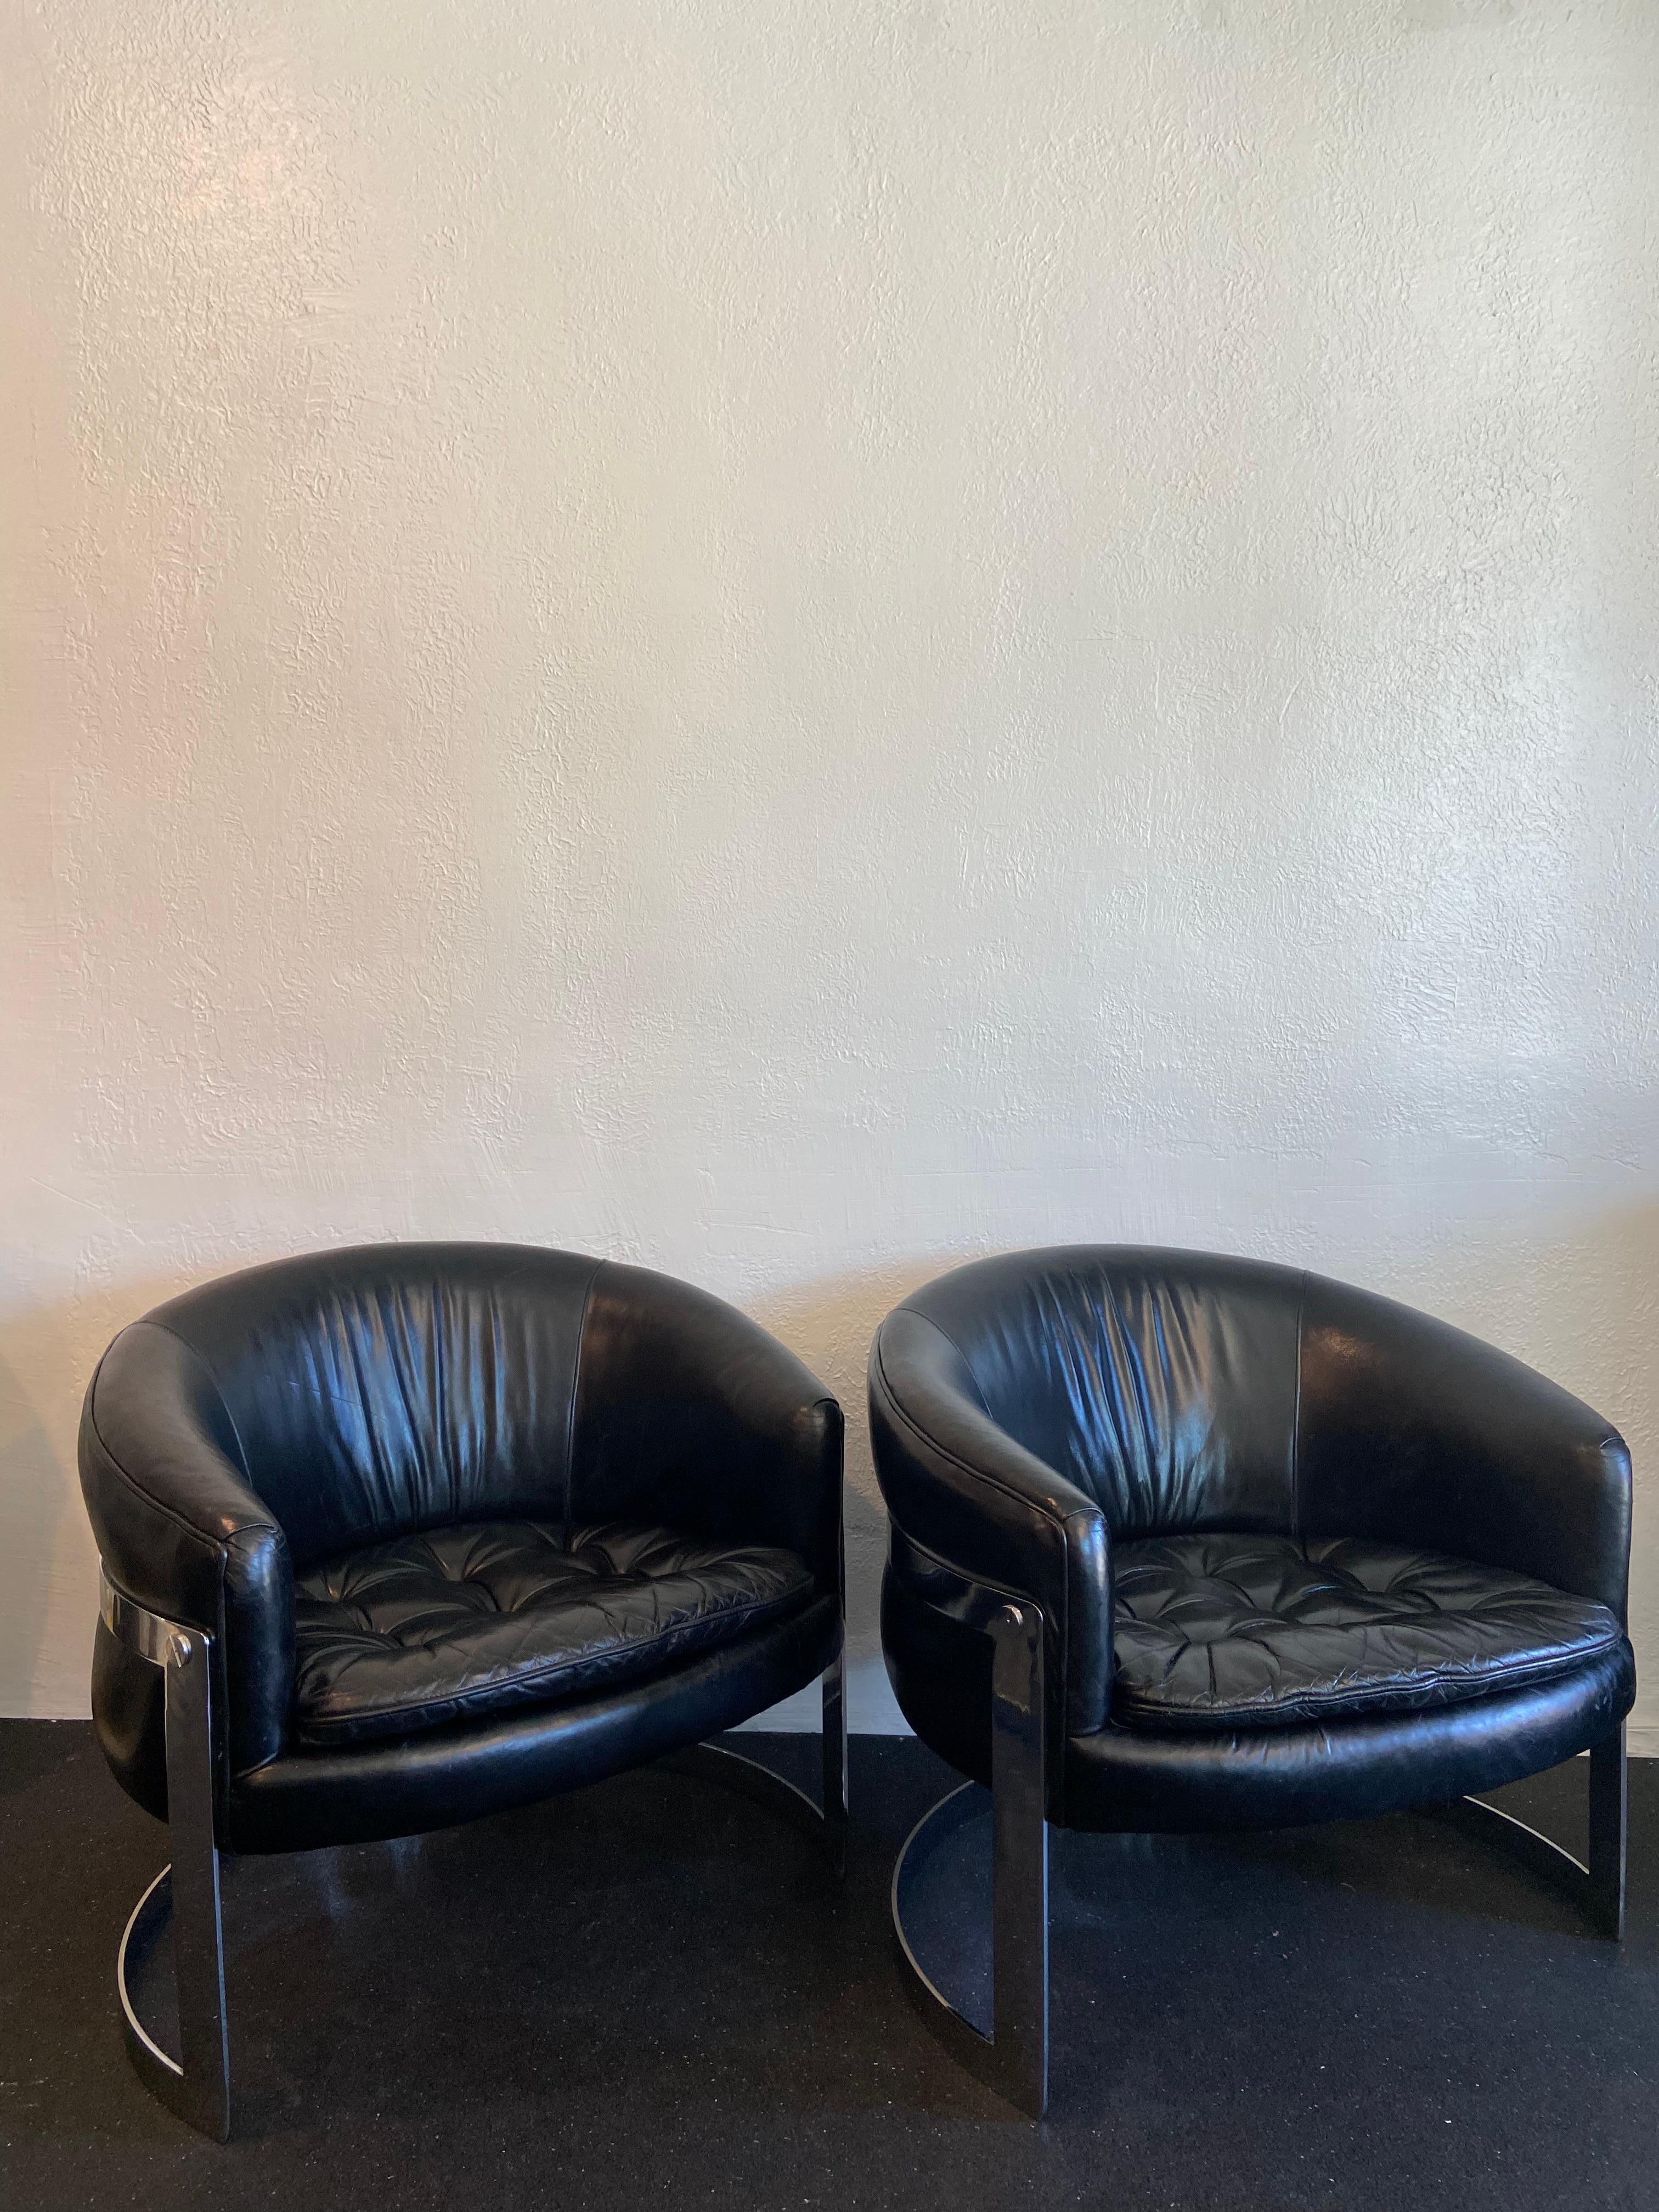 Pair of Flair Milo Baughman Style chrome cantilevered lounge chairs in black leather. The chairs do not retain the original labels. Chairs are in the original leather upholstery which has patinated beautifully throughout the years (please refer to